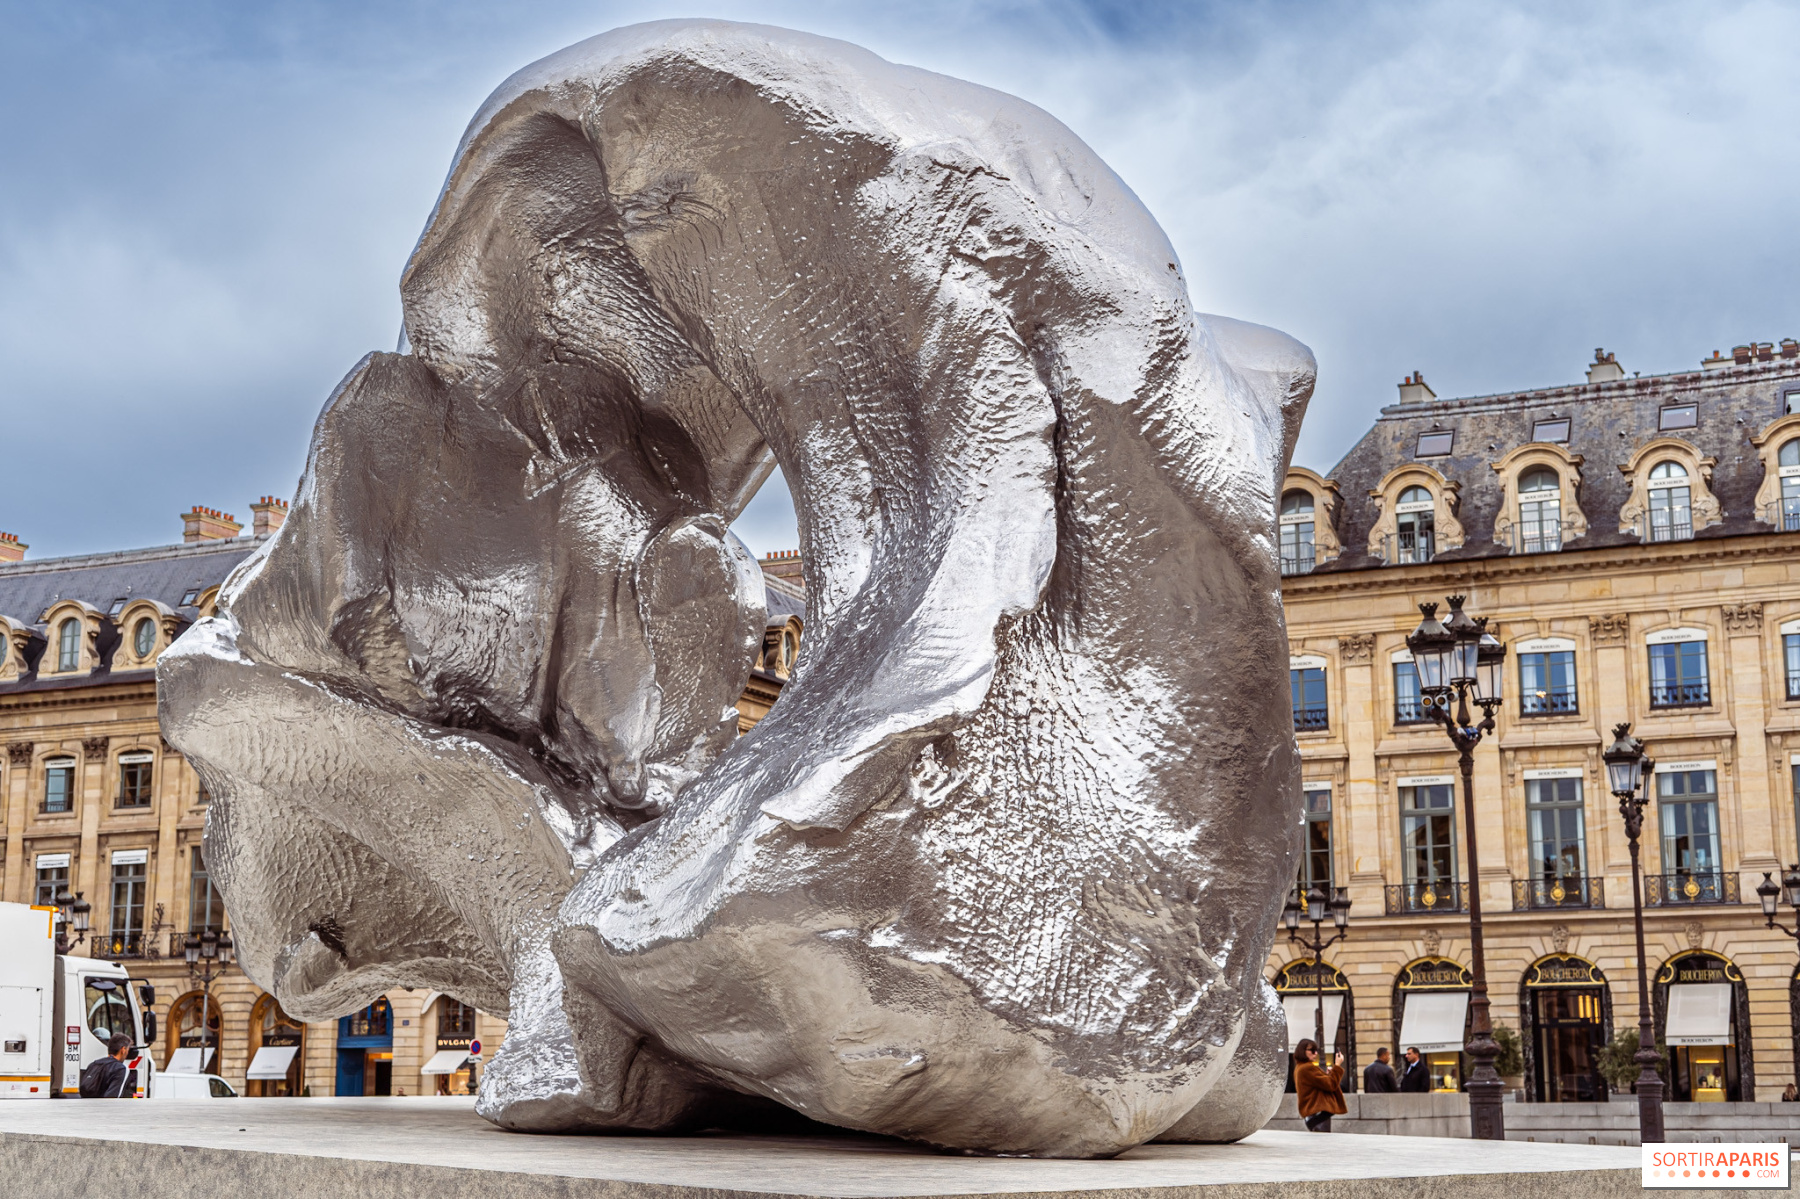 Exhibitions currently on show in the Marais district of Paris